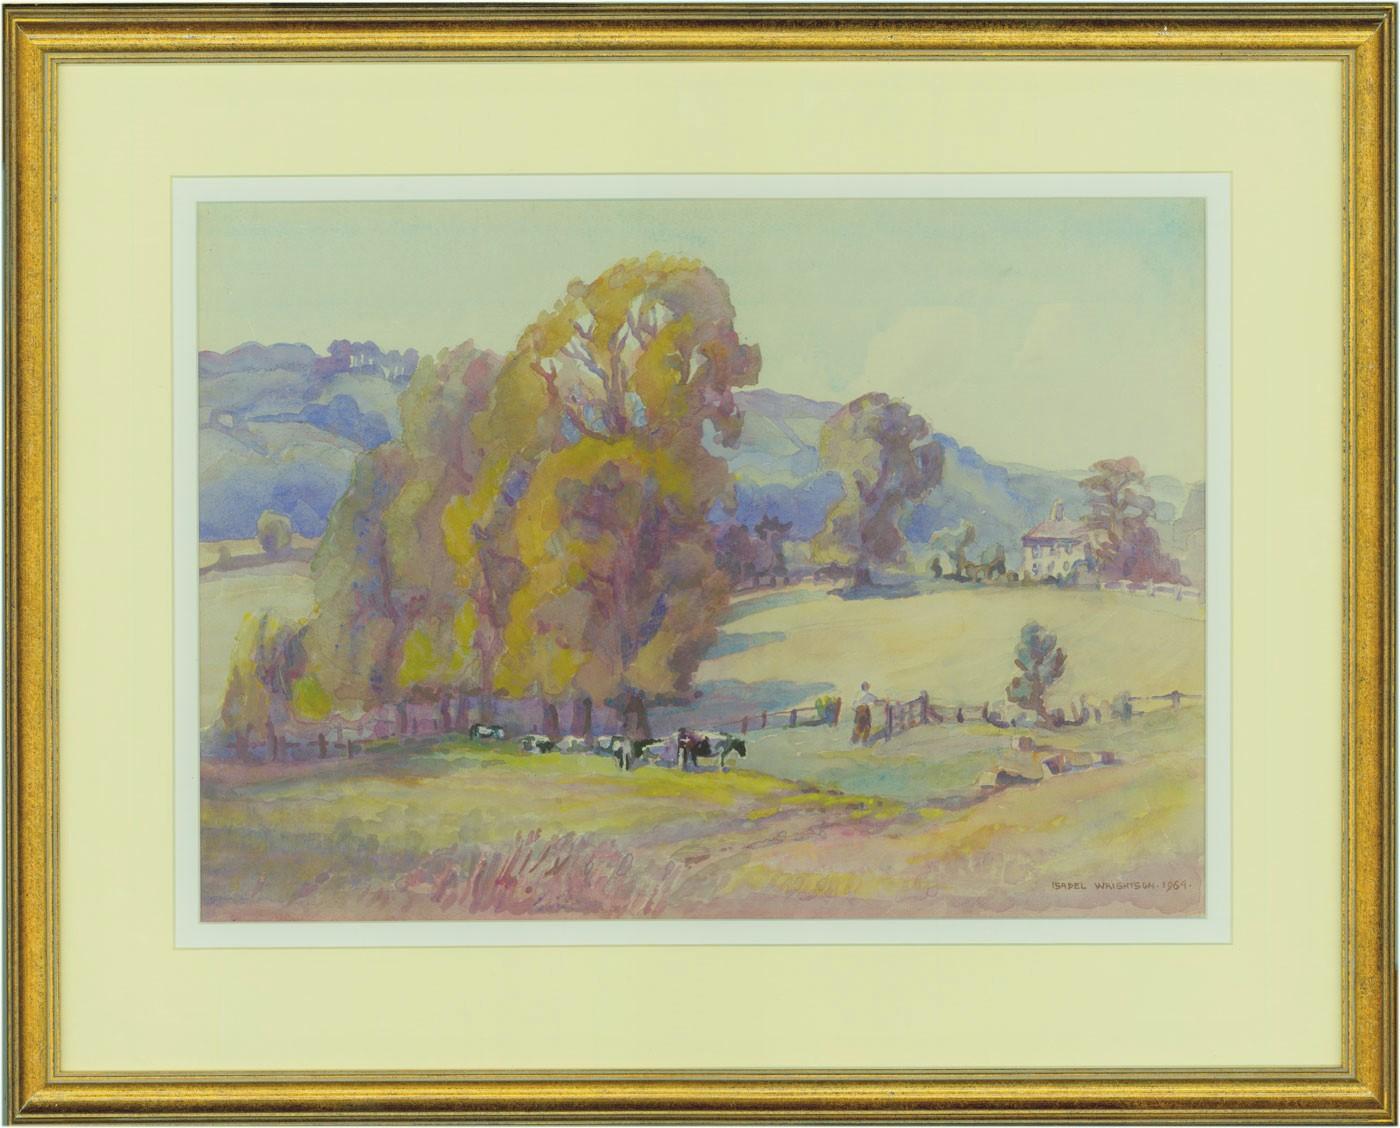 Isabel Wrightson (b.1890) - Signed 1964 Watercolour, Arundel Park from Burpham